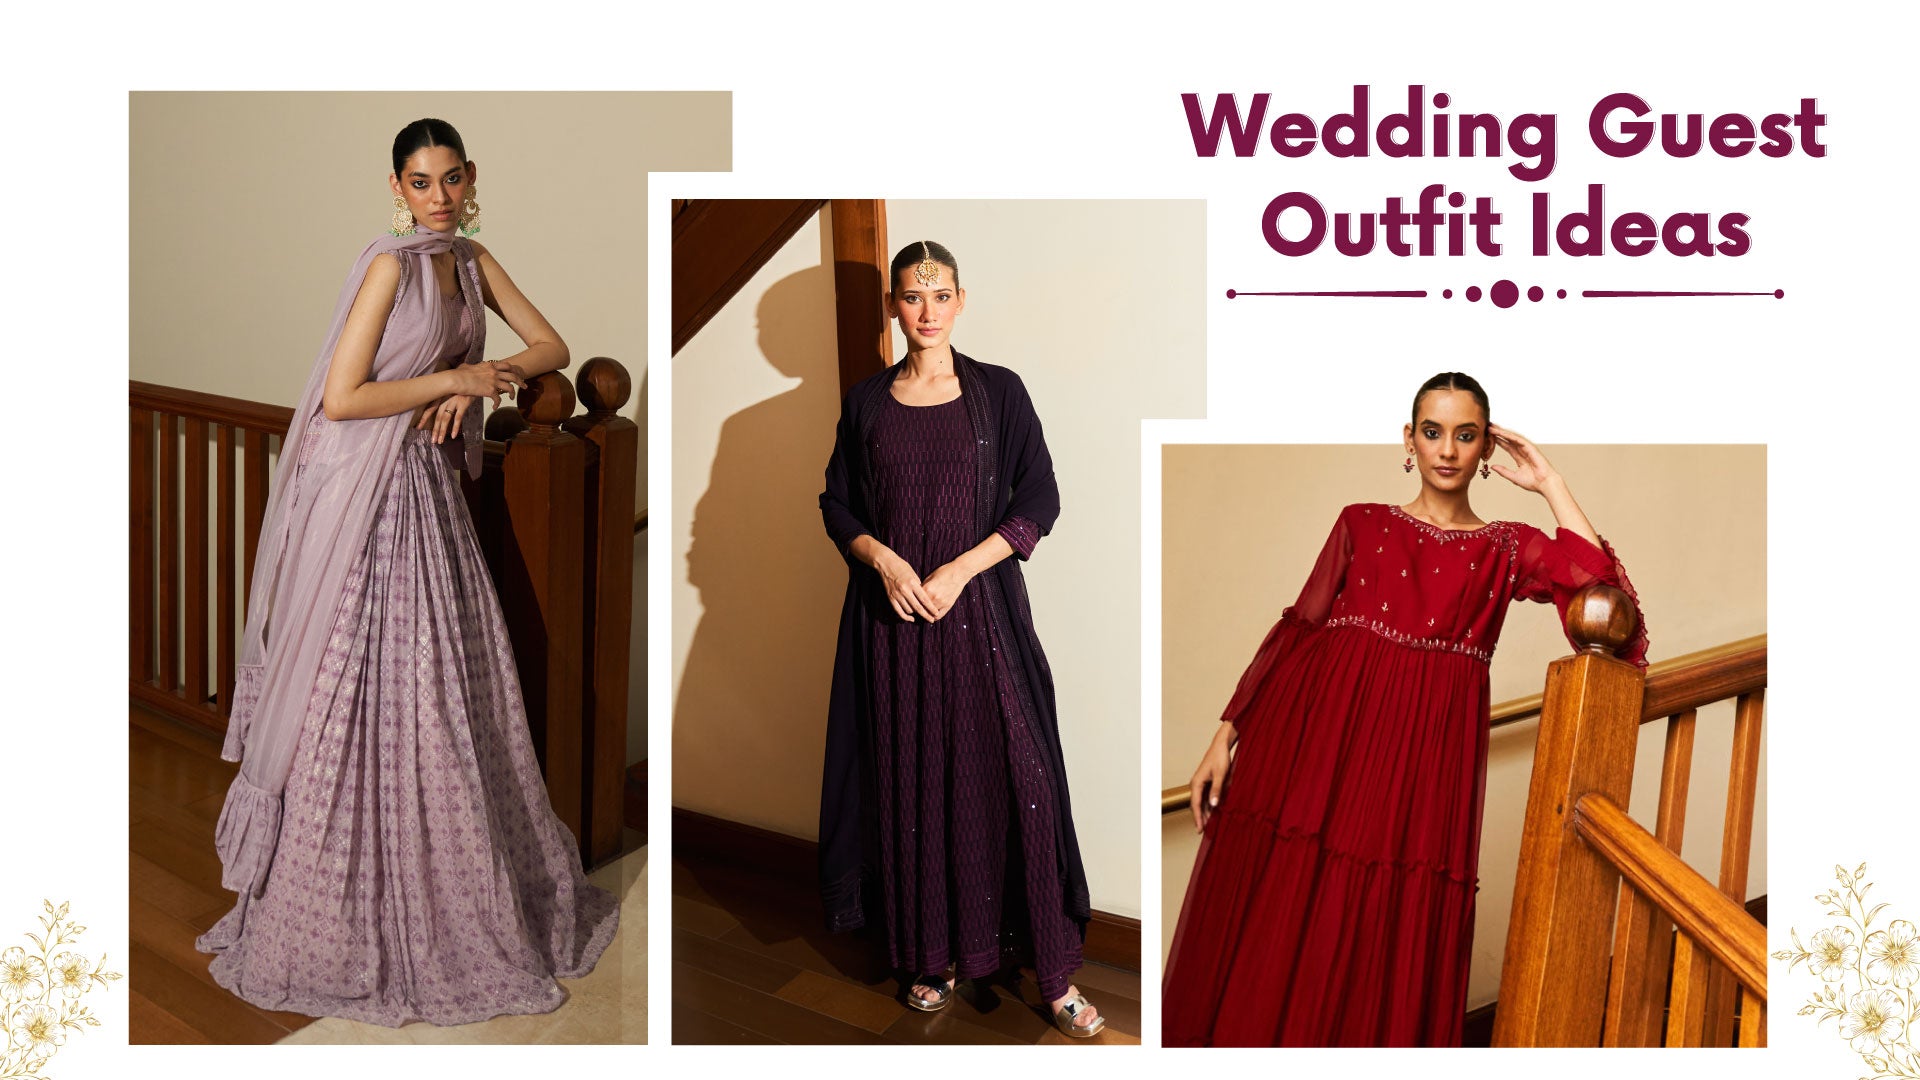 Wedding Guest Outfit Ideas To Stand Out Without Upstaging The Bride